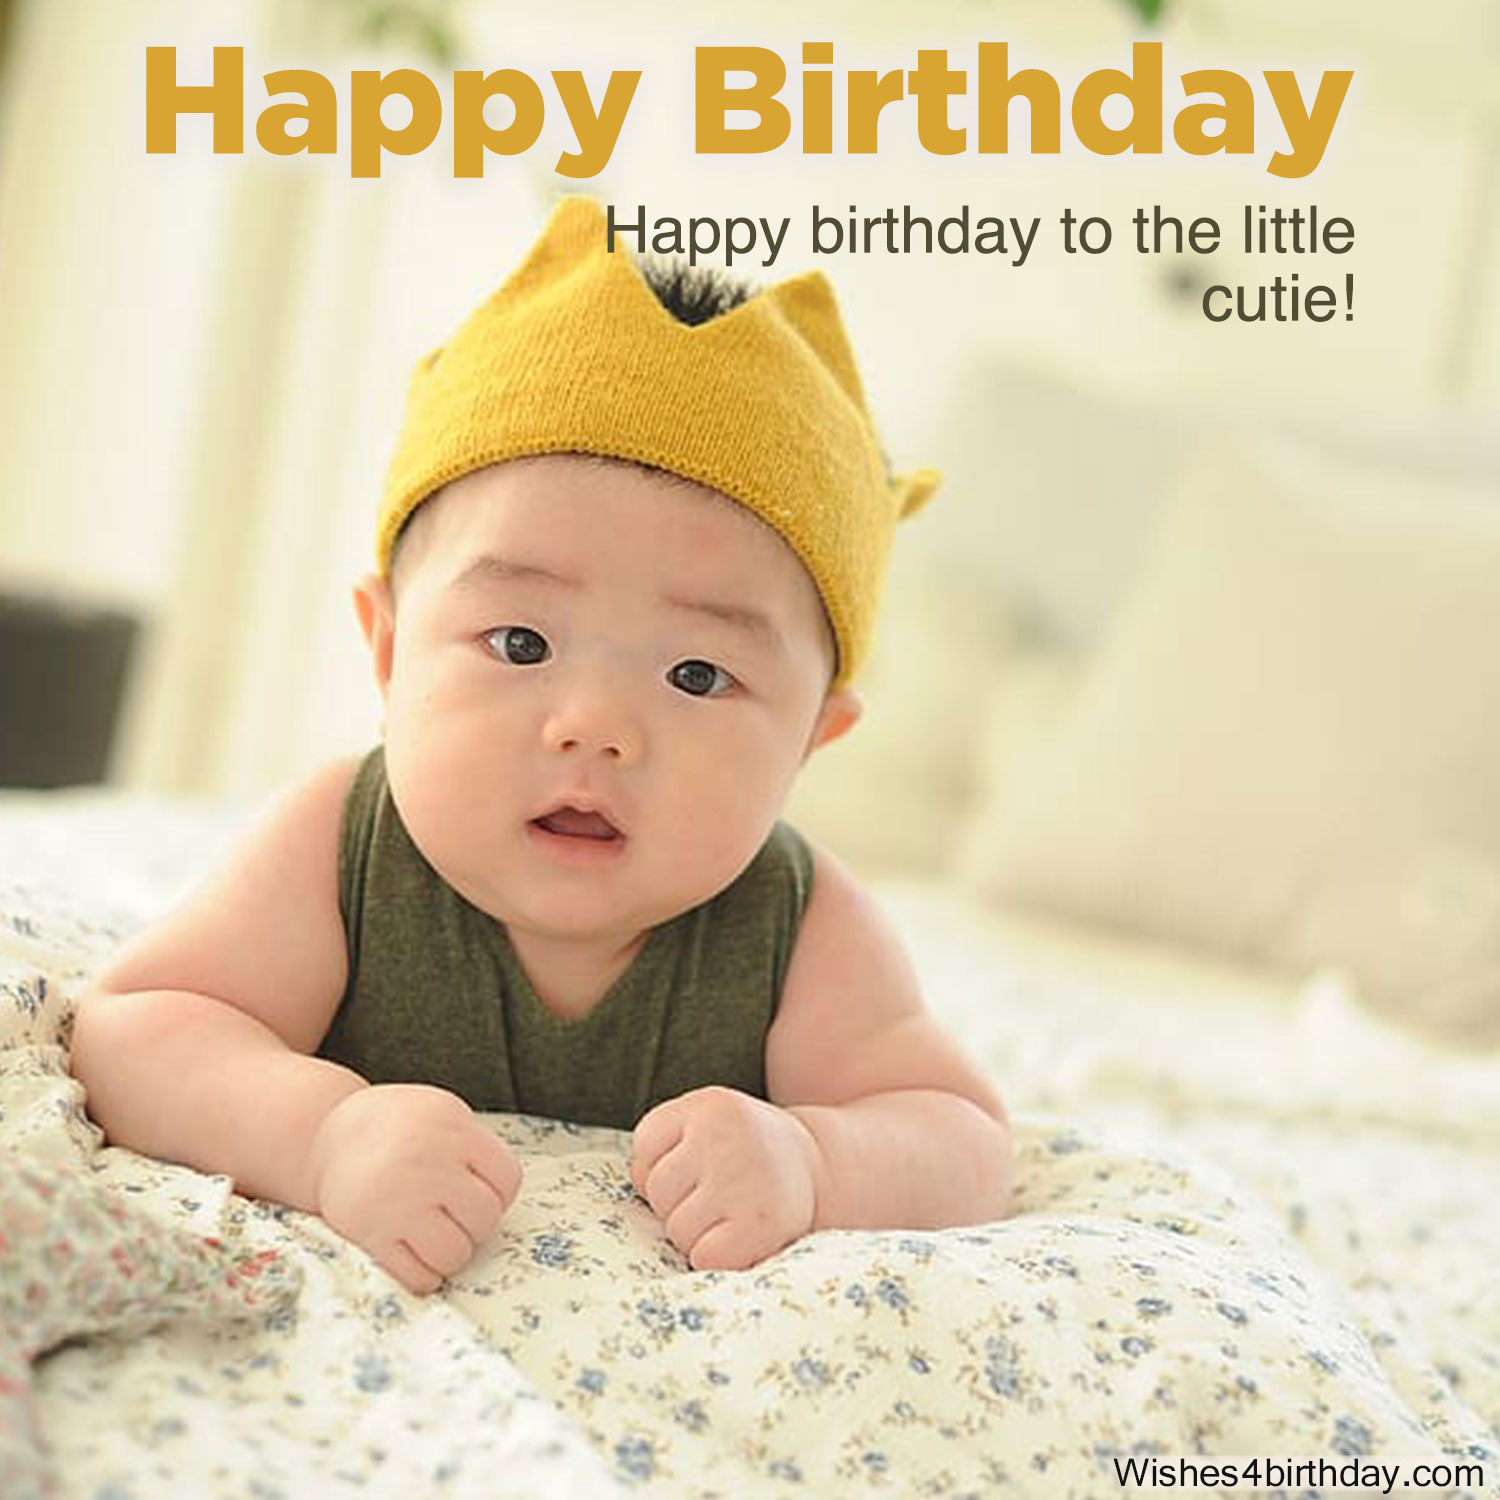 Top animated birthday wishes for first baby - Happy Birthday Wishes, Memes,  SMS & Greeting eCard Images